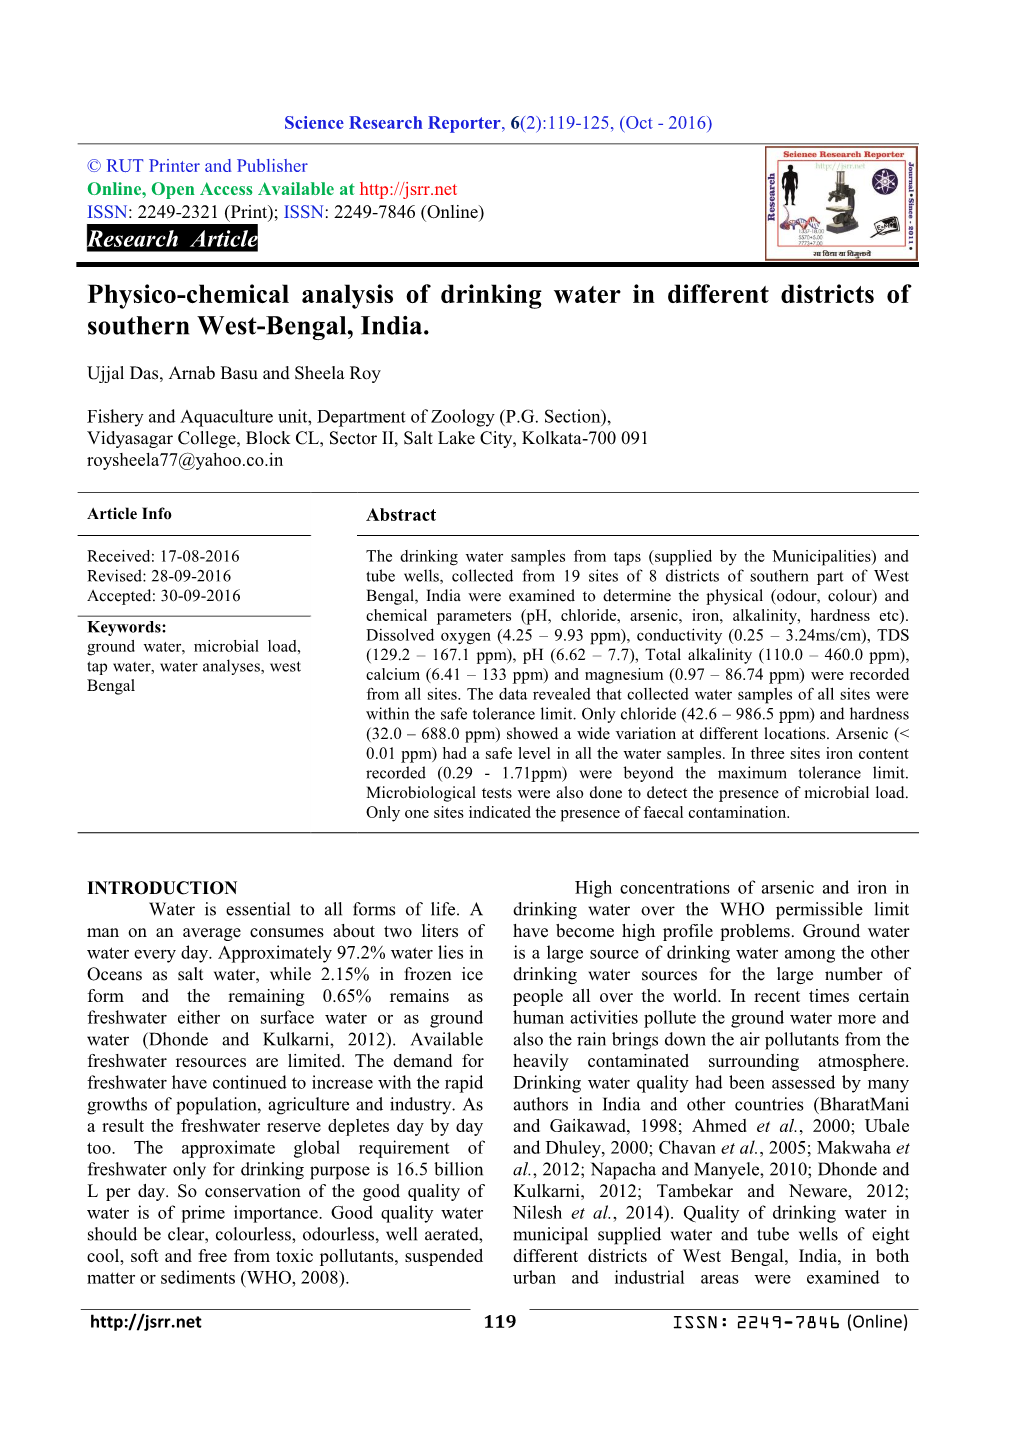 Physico-Chemical Analysis of Drinking Water in Different Districts of Southern West-Bengal, India